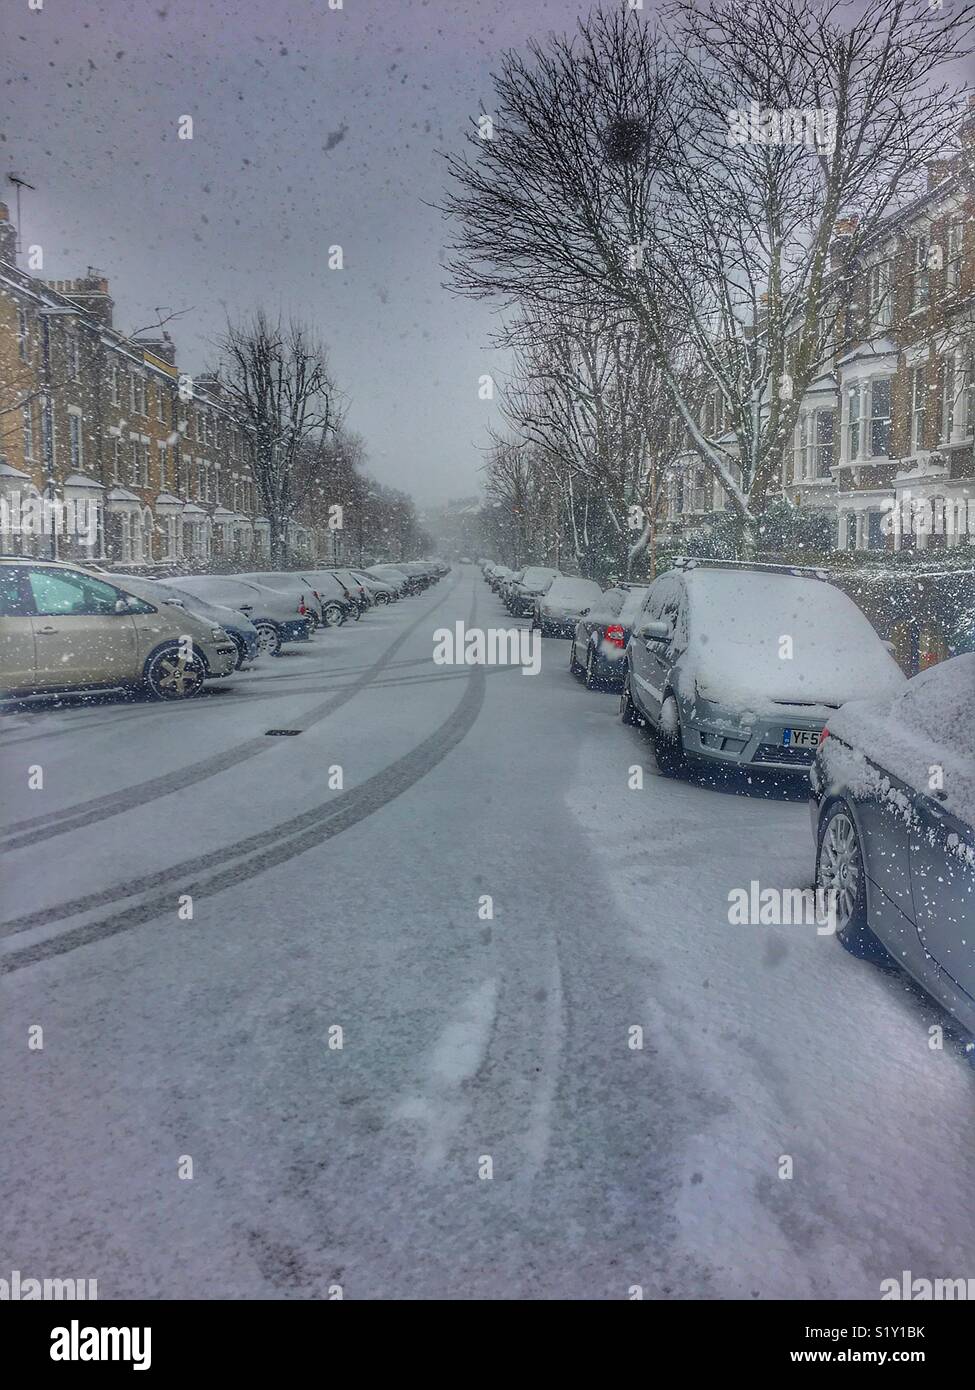 Residential street with heavy snow in London, during the so-called Beast from The East stormy weather on 28 February 2018 Stock Photo